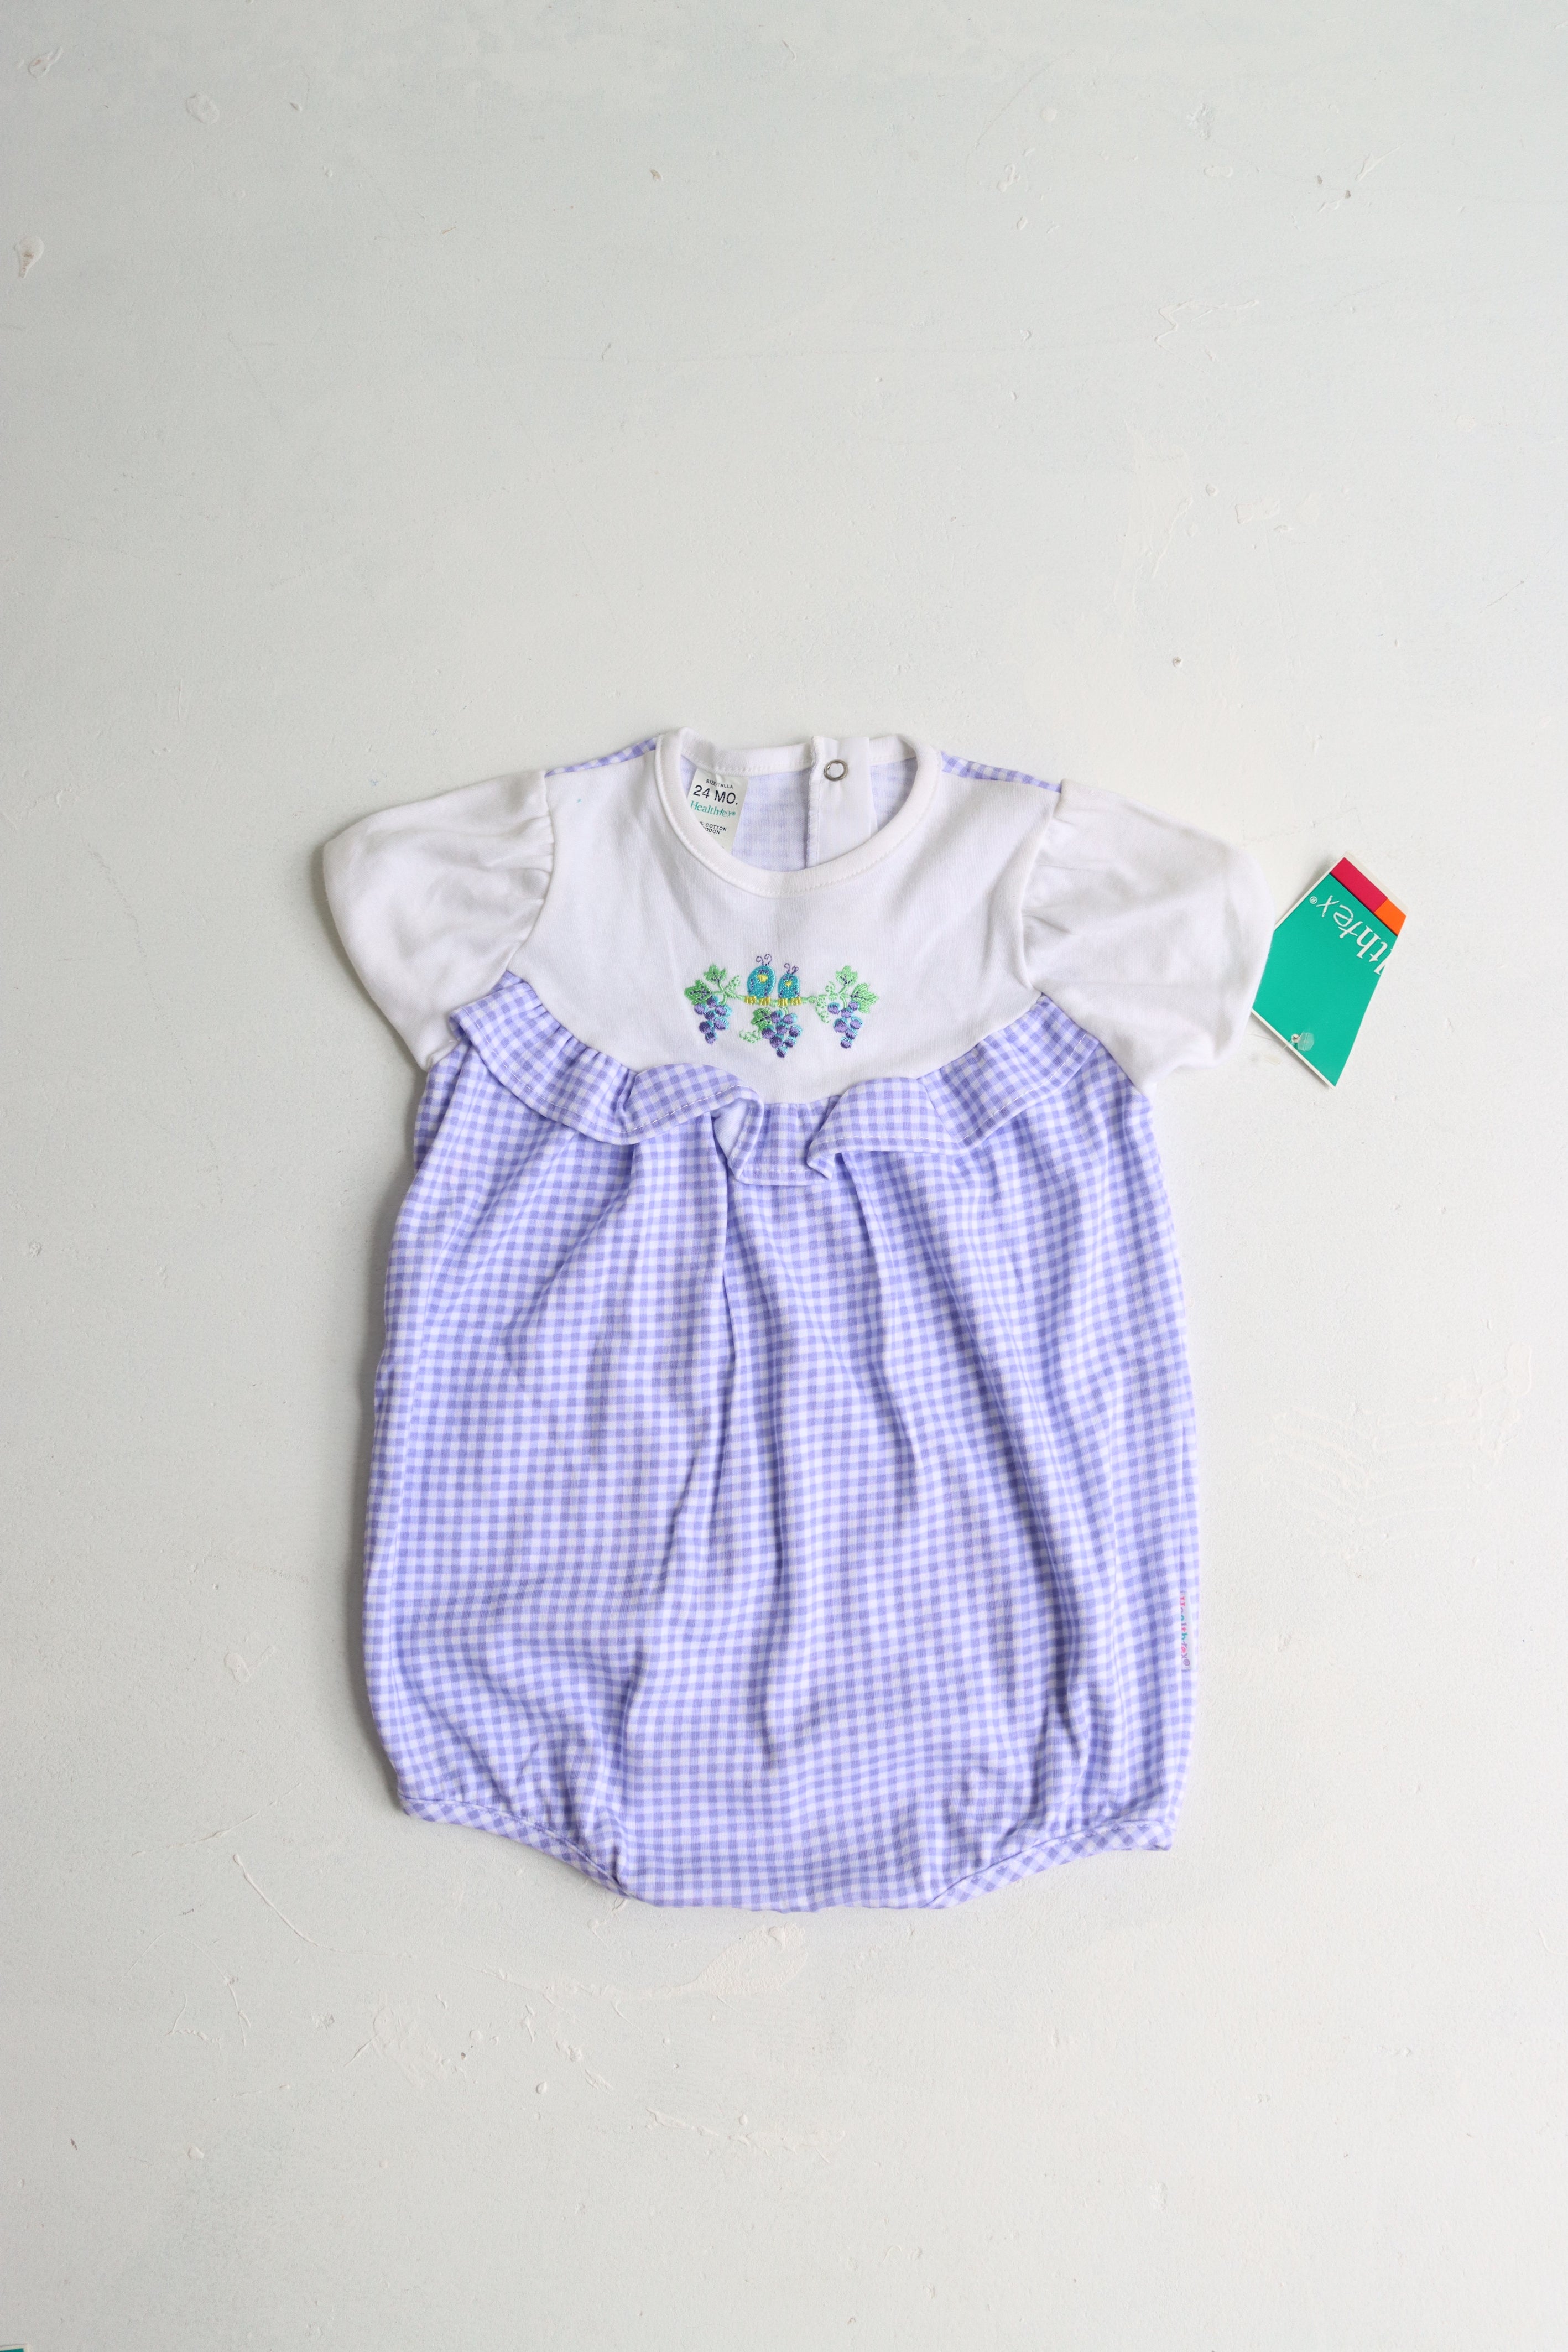 Vintage Healthtex romper (new with tag) - size 24 months